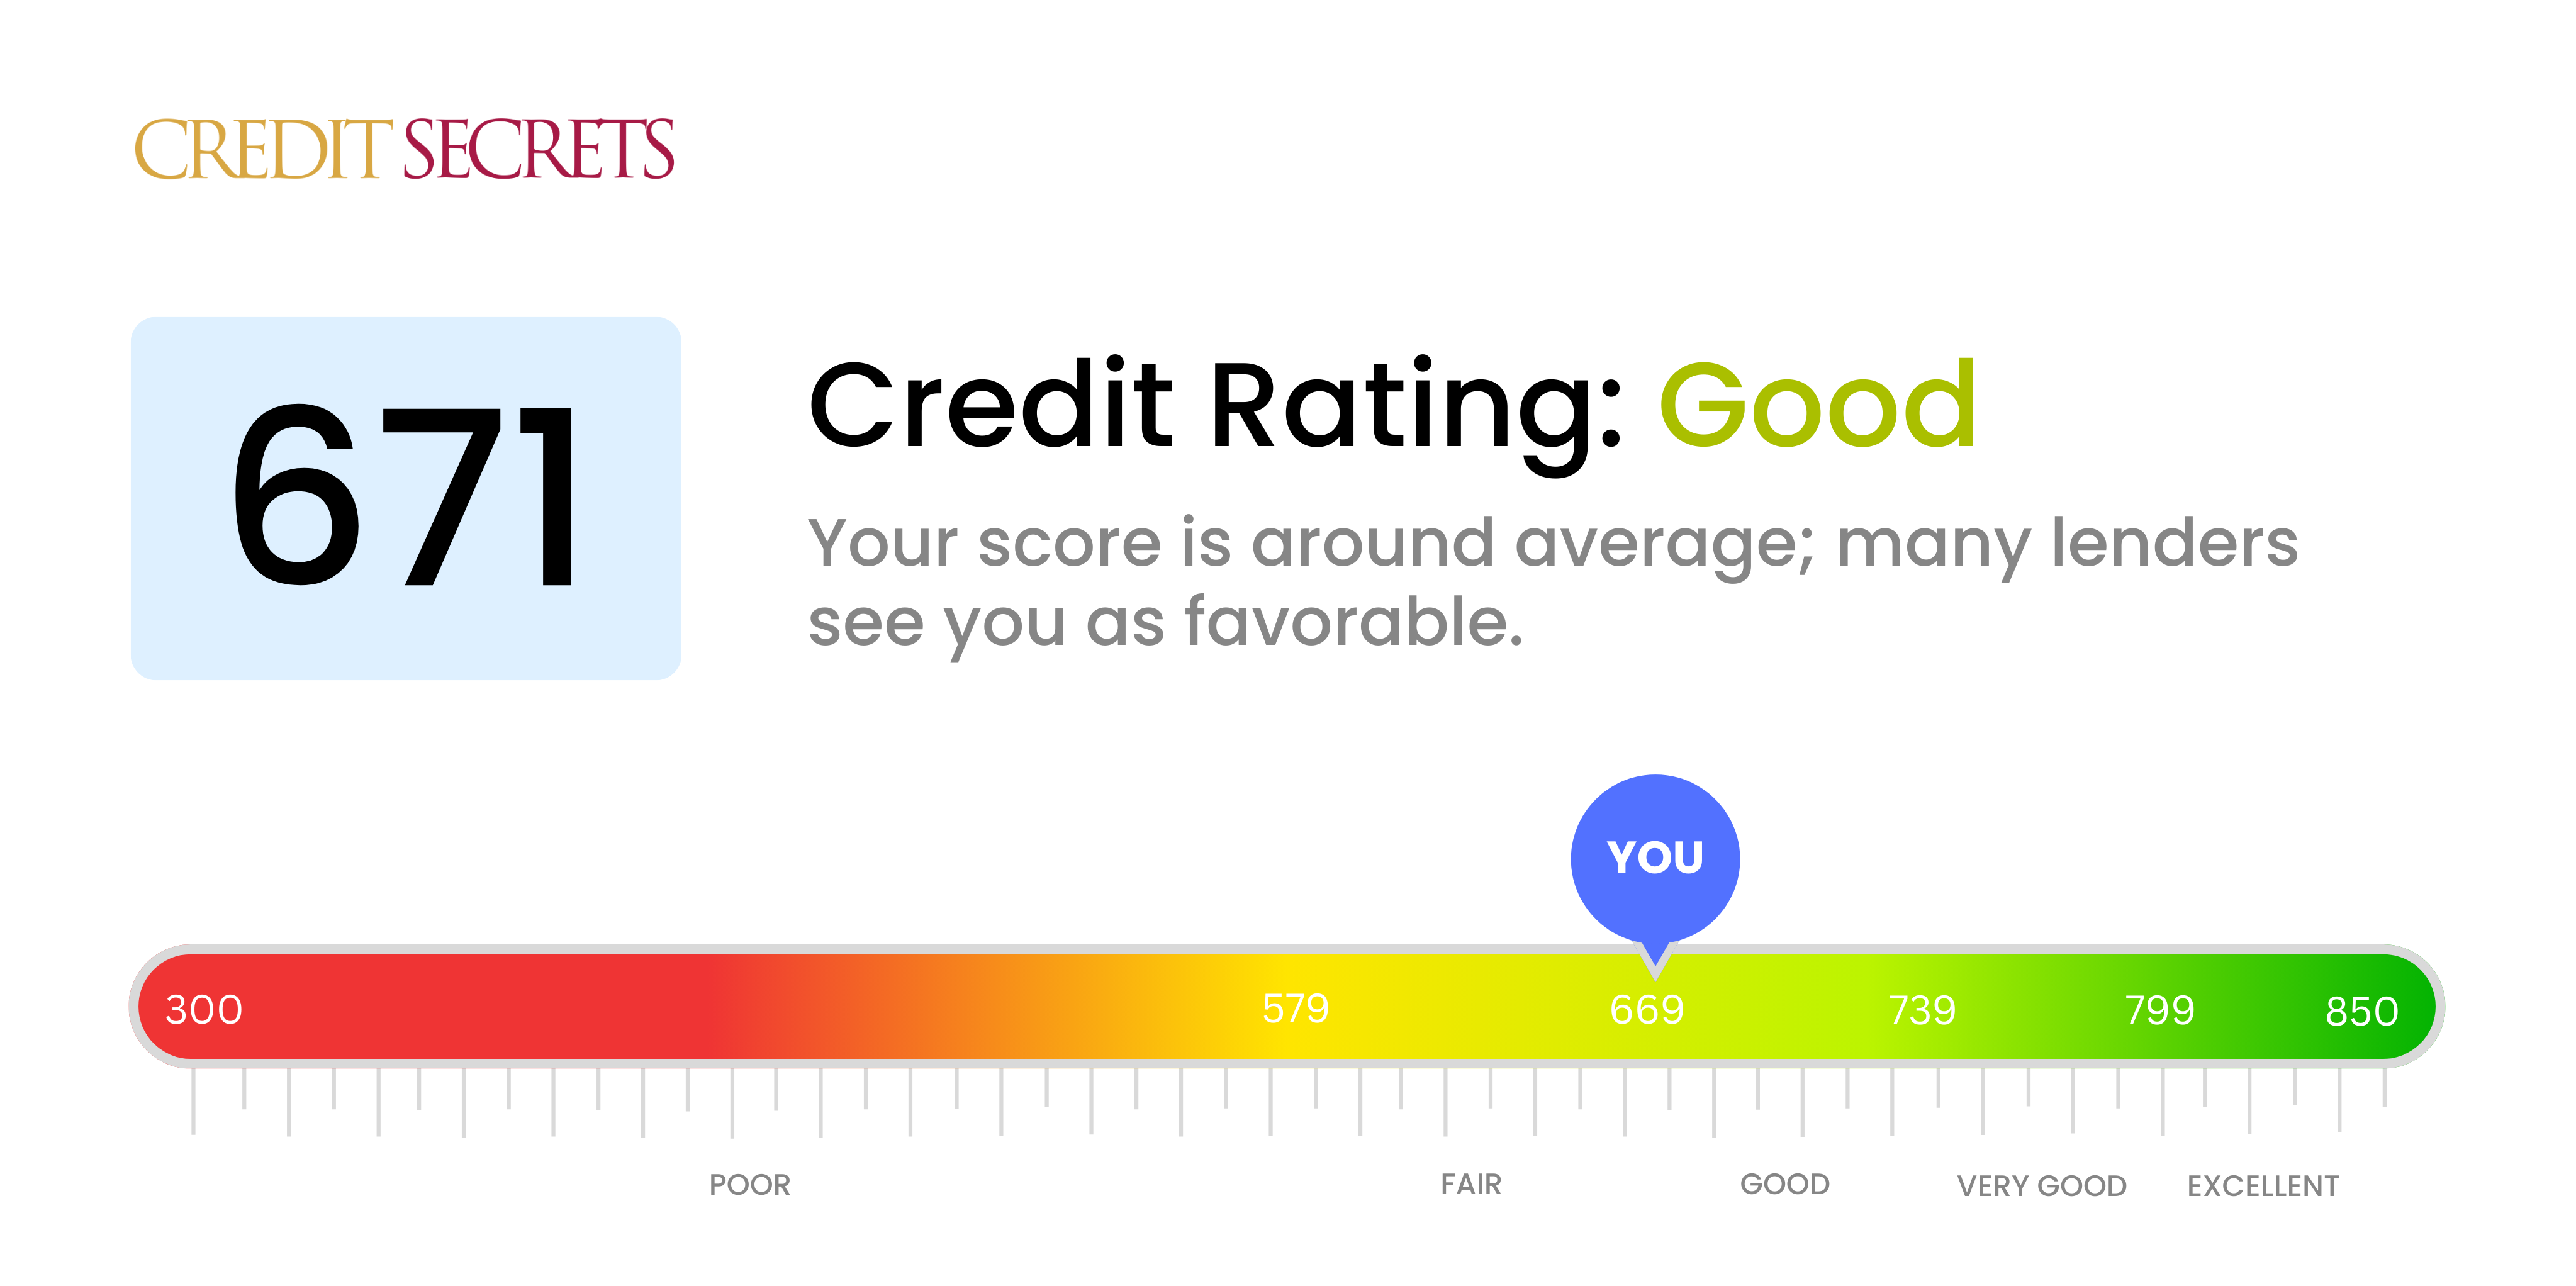 Is 671 a good credit score?